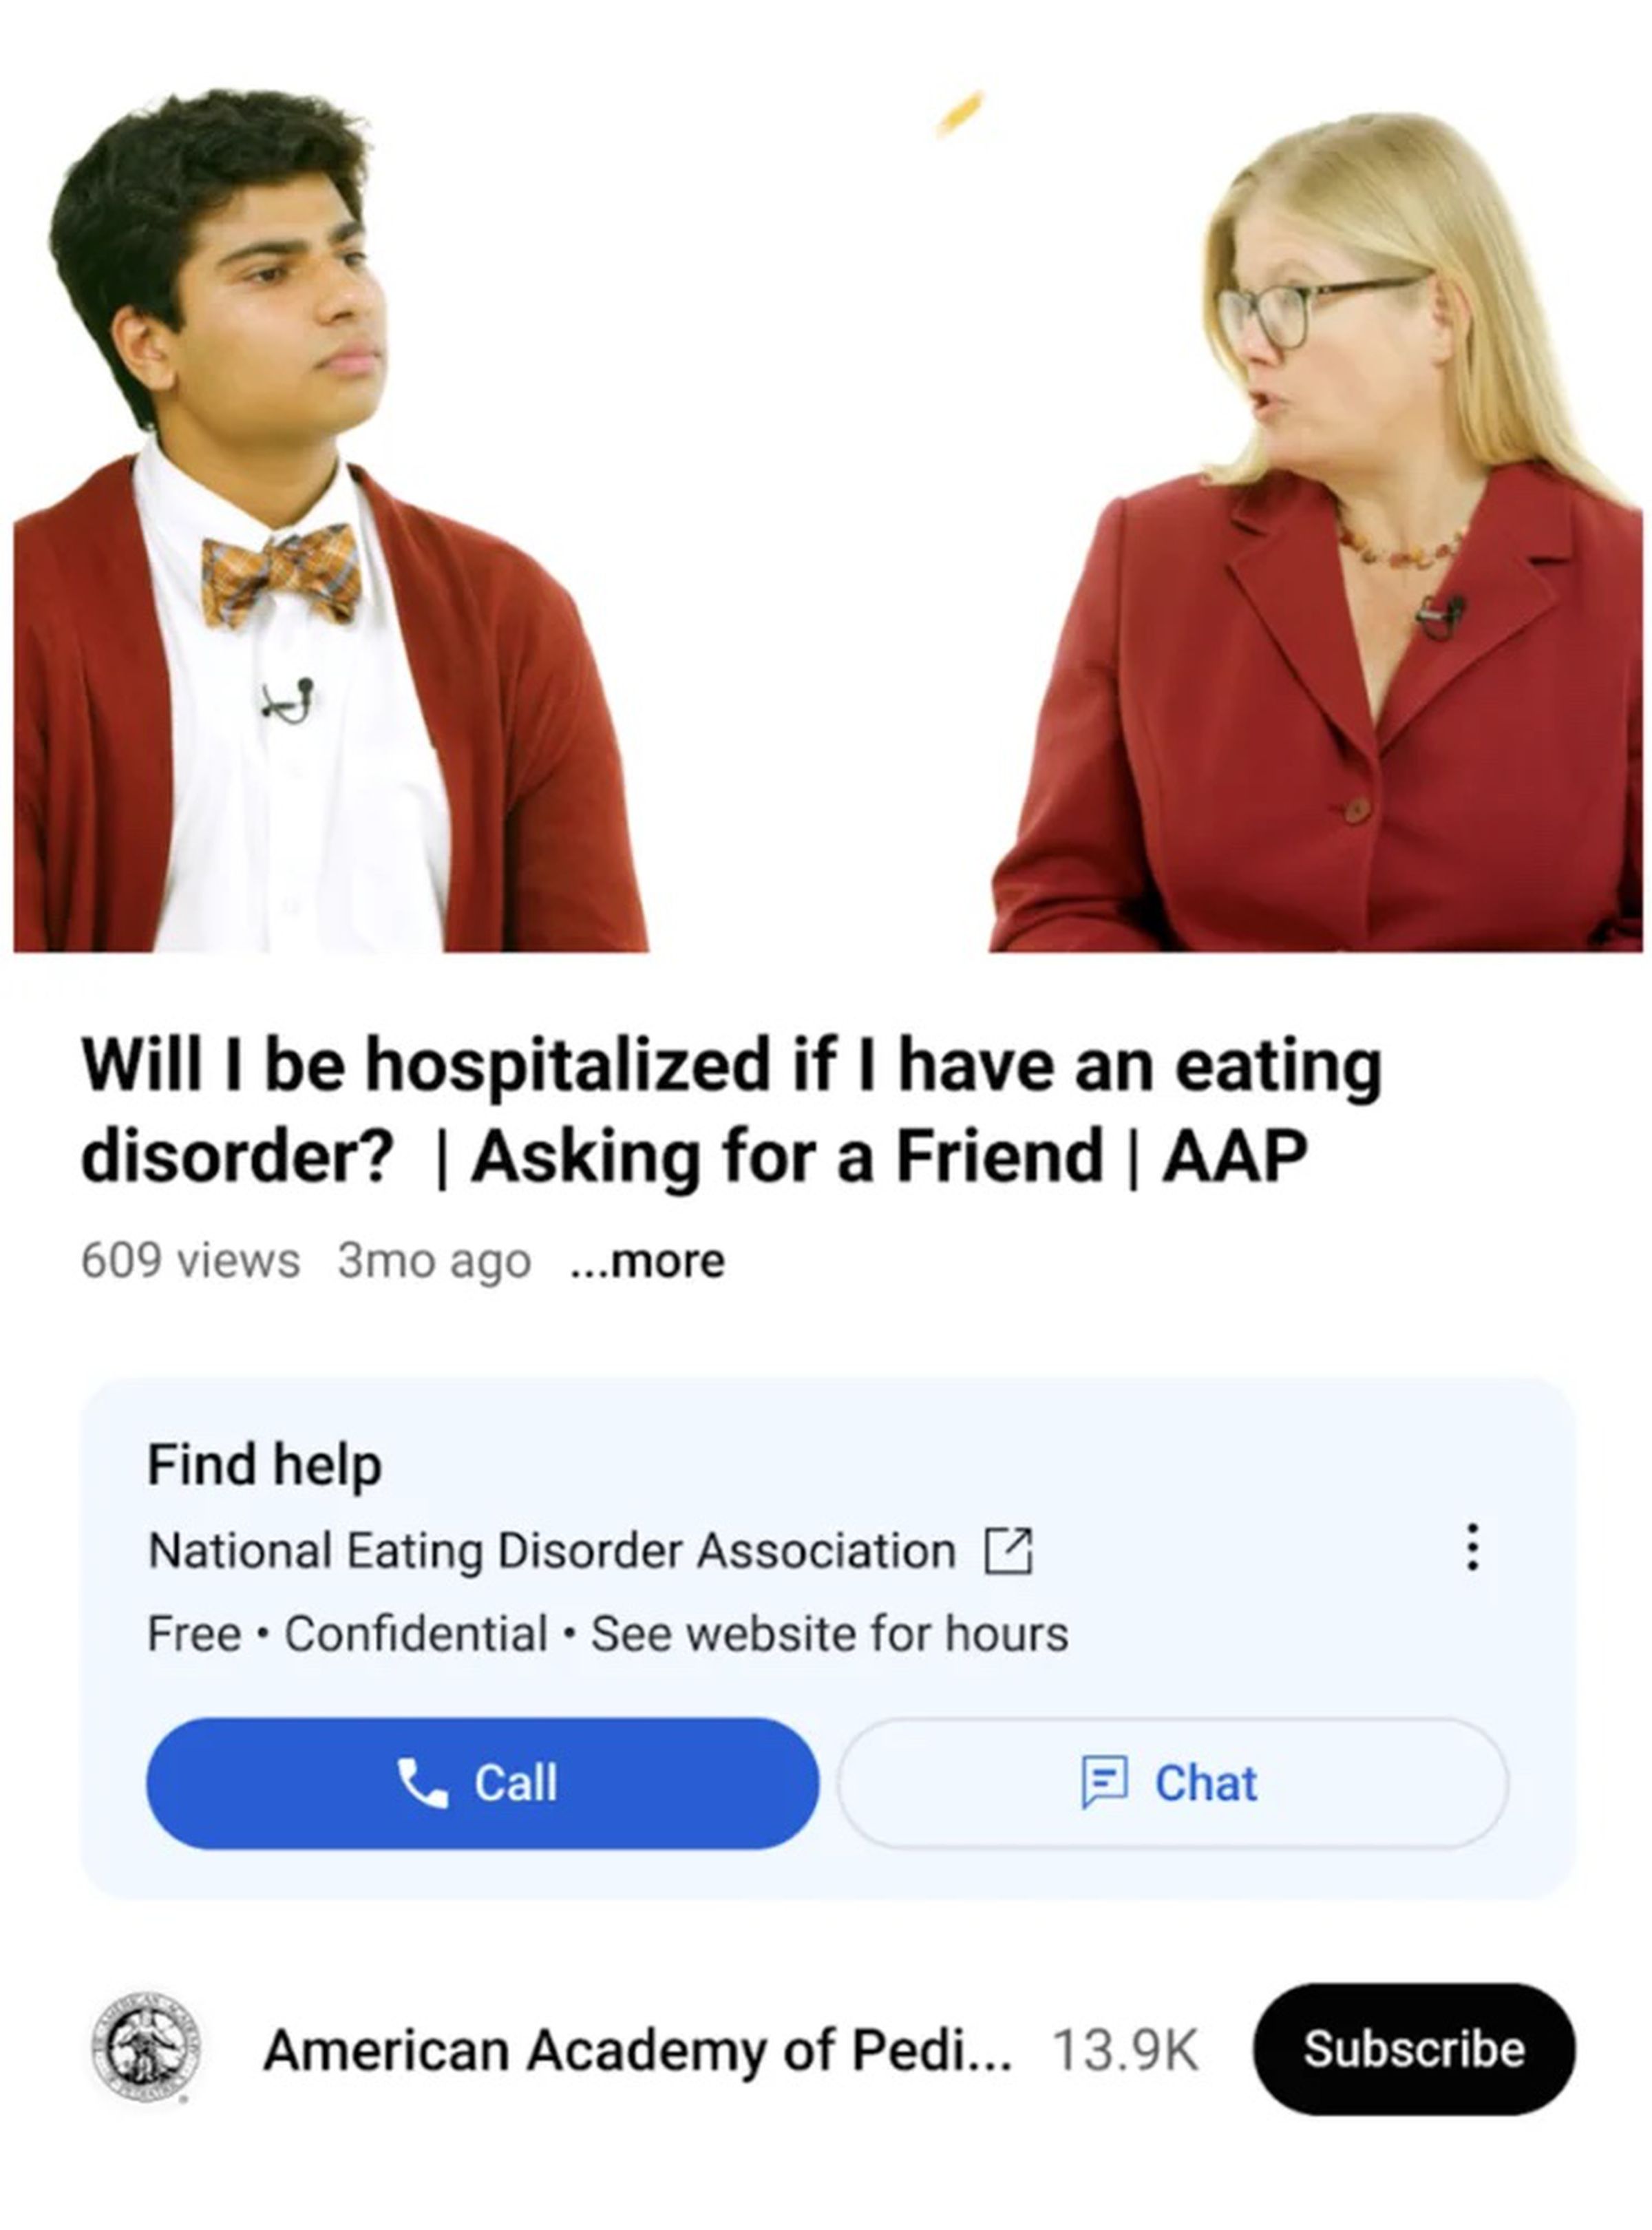 A YouTube video titled, “Will I be hospitalized if I have an eating disorder? | Asking for a friend | AAP” with a resource pop-up below.